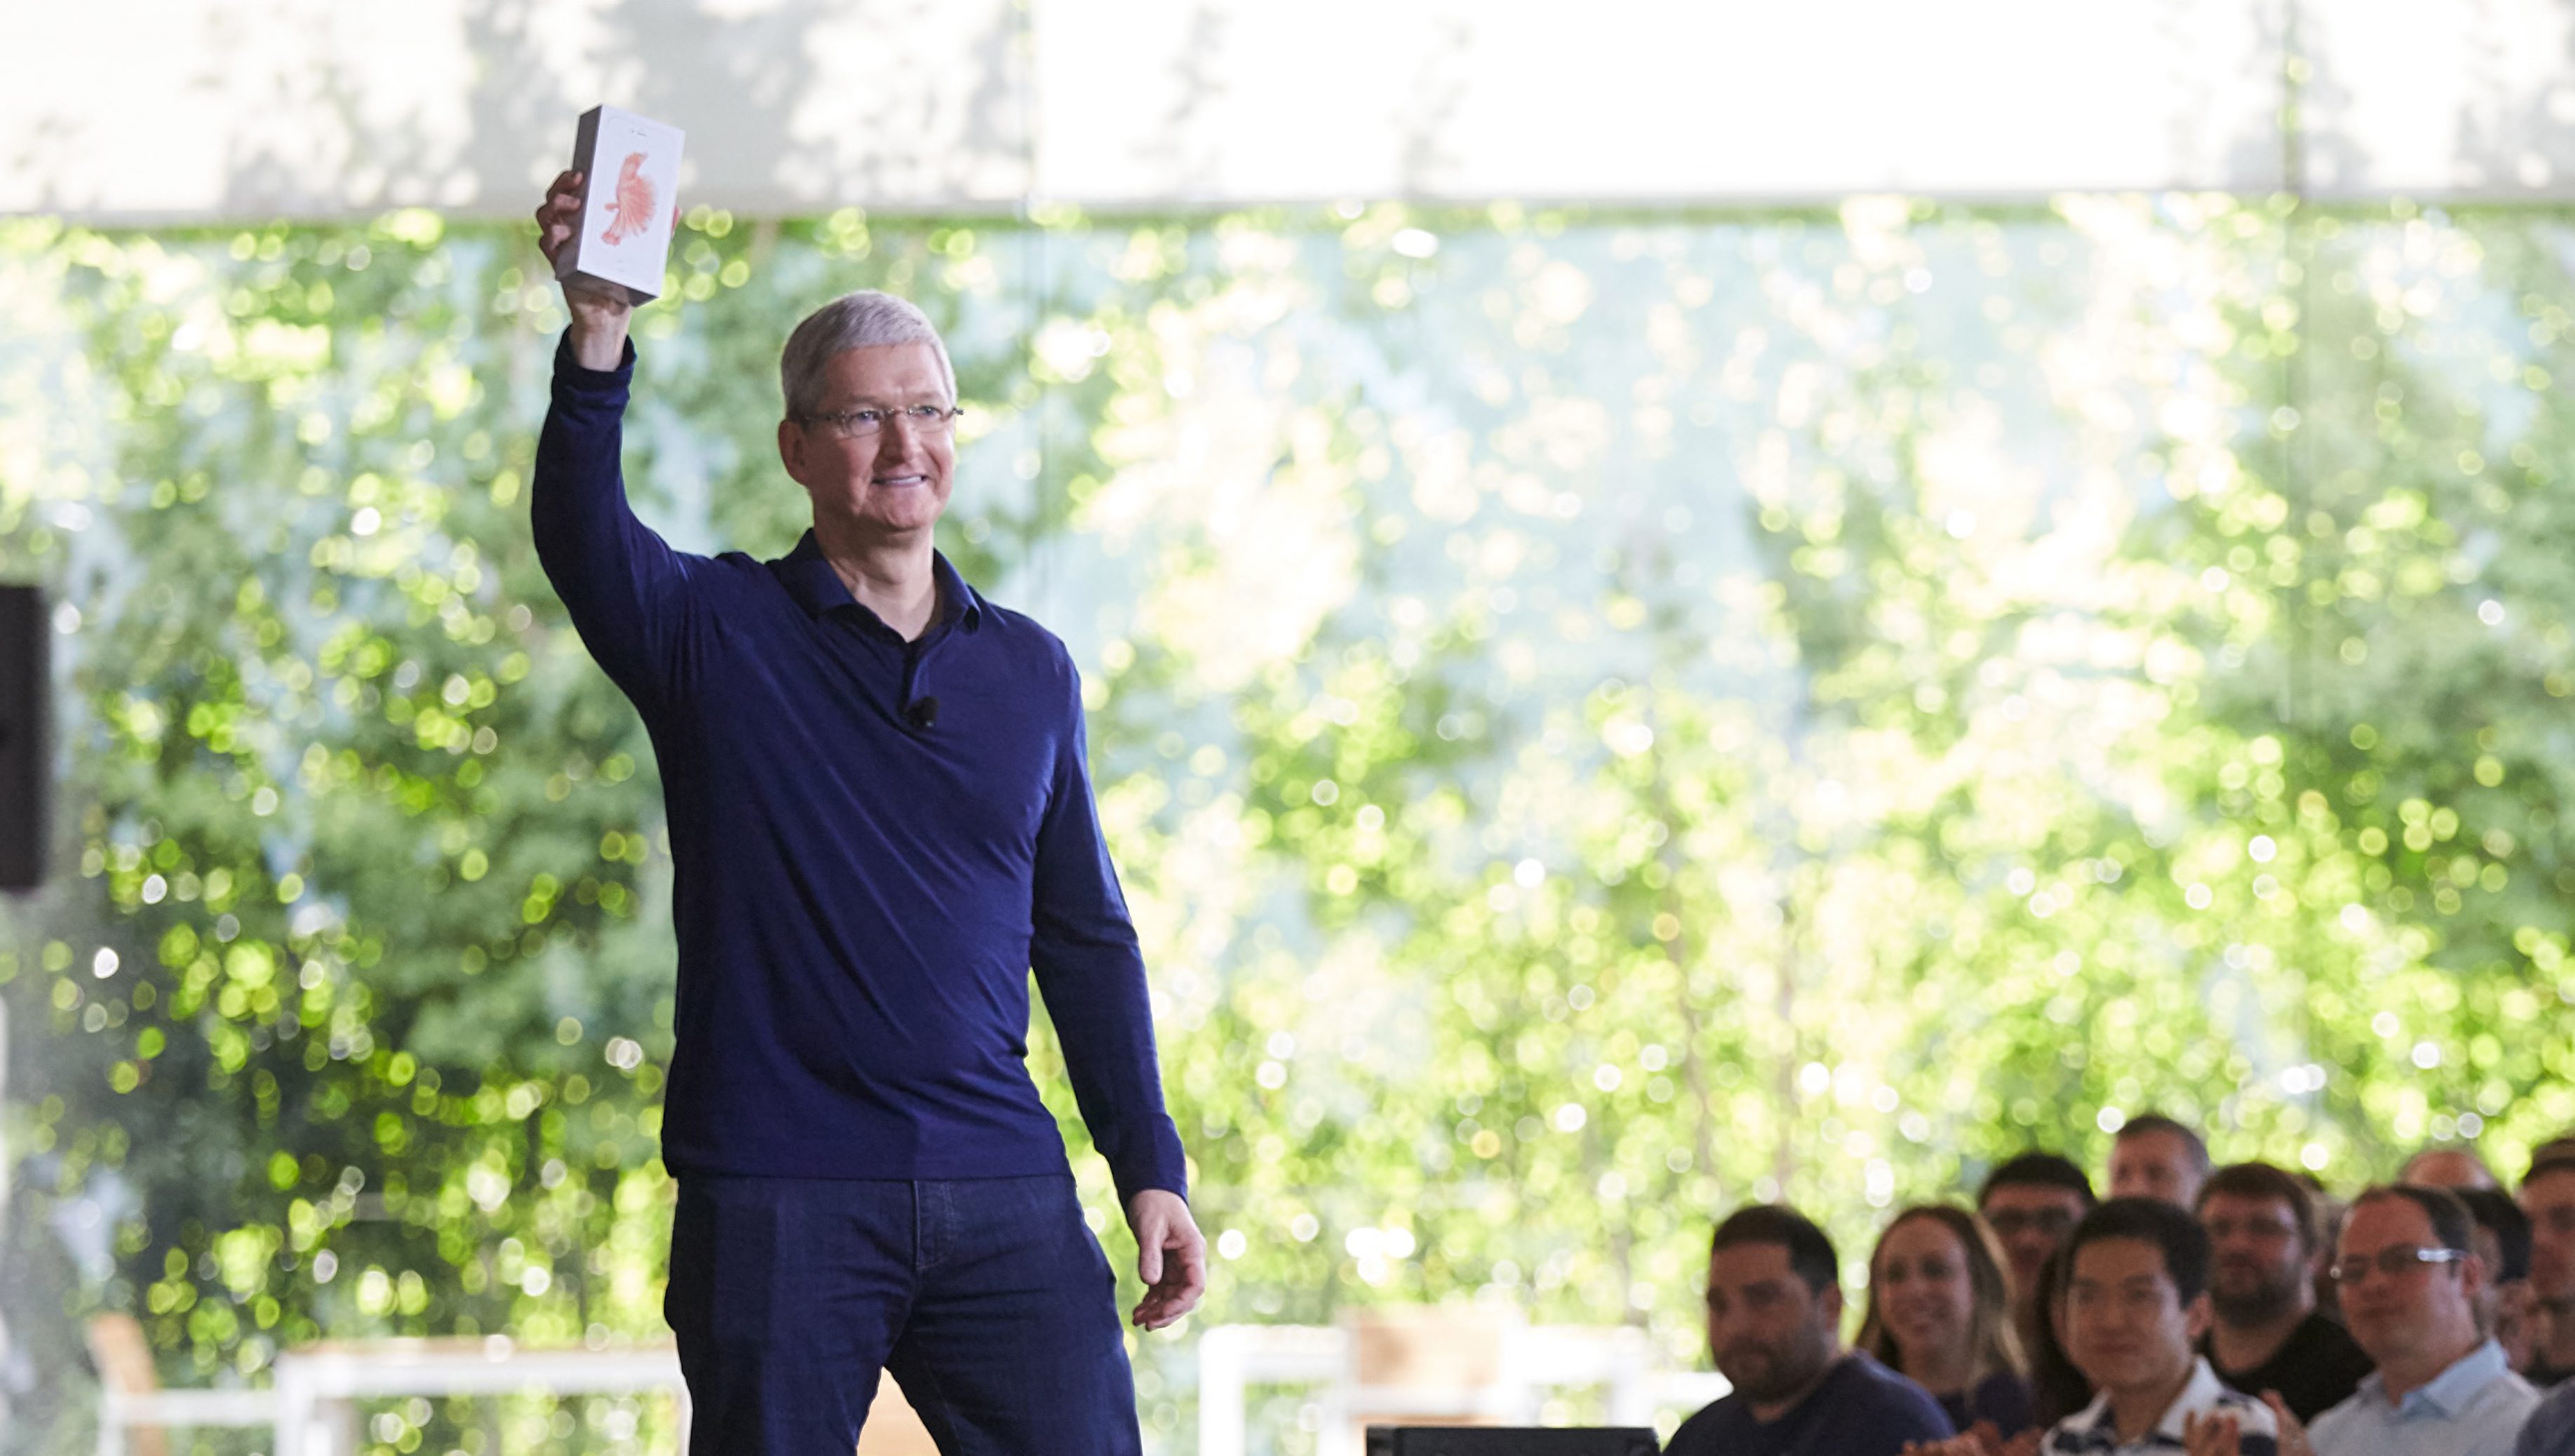 Apple CEO Tim Cook shows off the one billionth iPhone to Apple staff